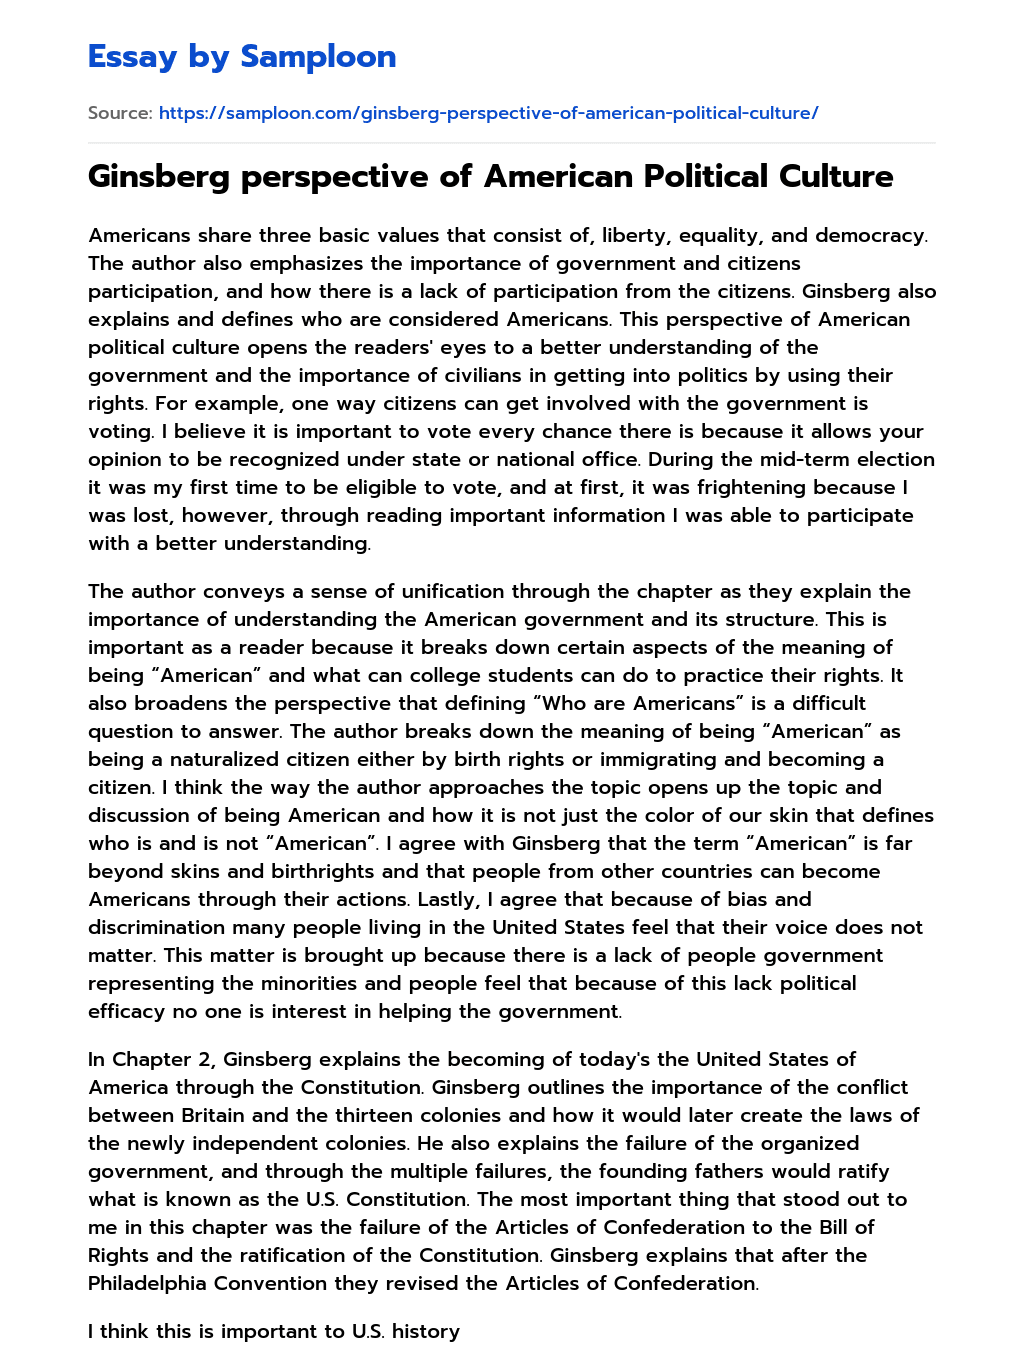 Ginsberg perspective of American Political Culture essay